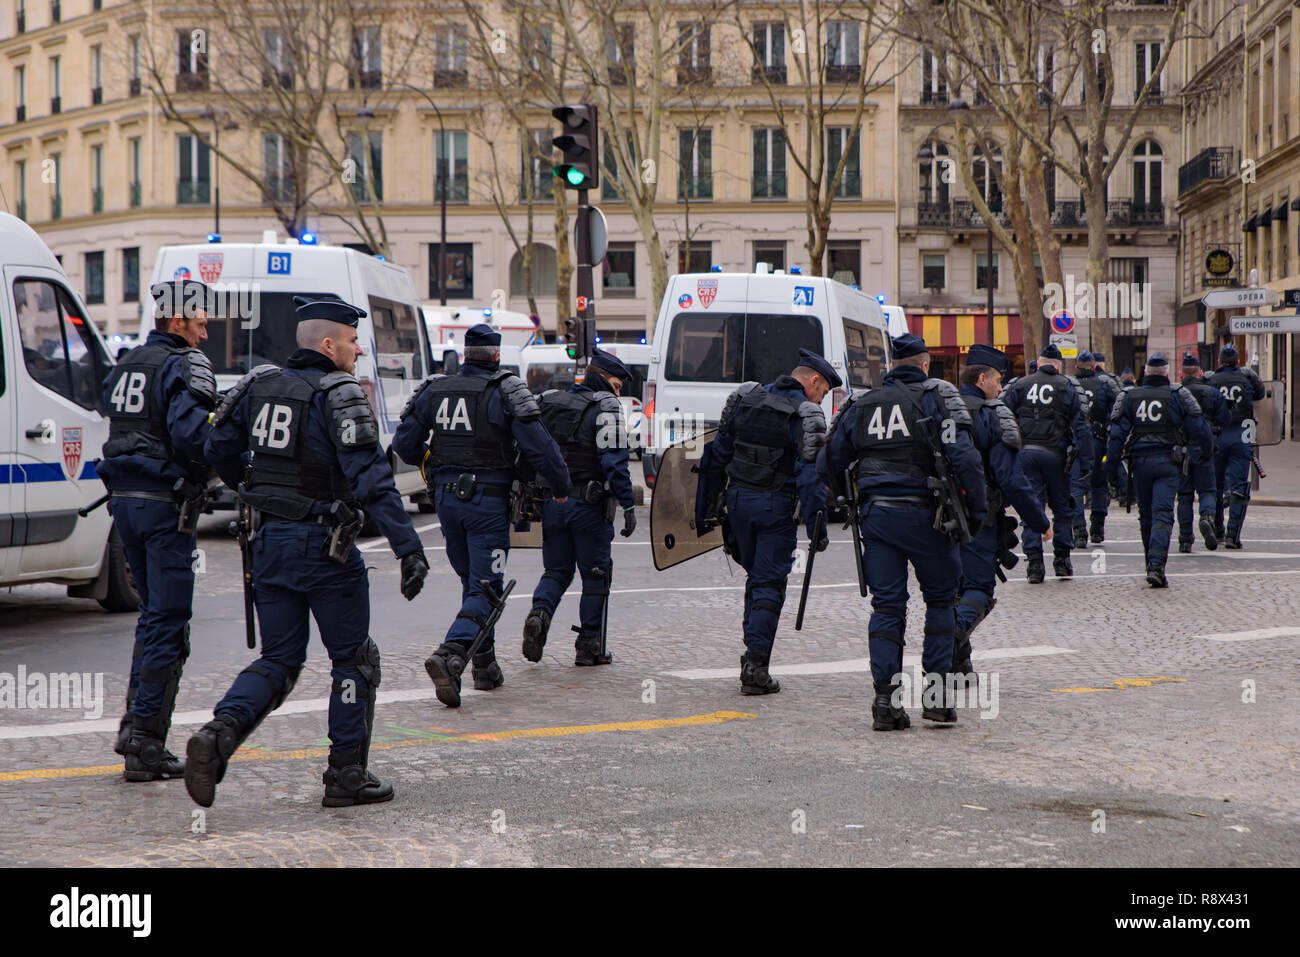 Riot police for the Yellow Vests demonstration (Gilets Jaunes) protesters against government, and French President at Champs-Élysées, Paris, France Stock Photo